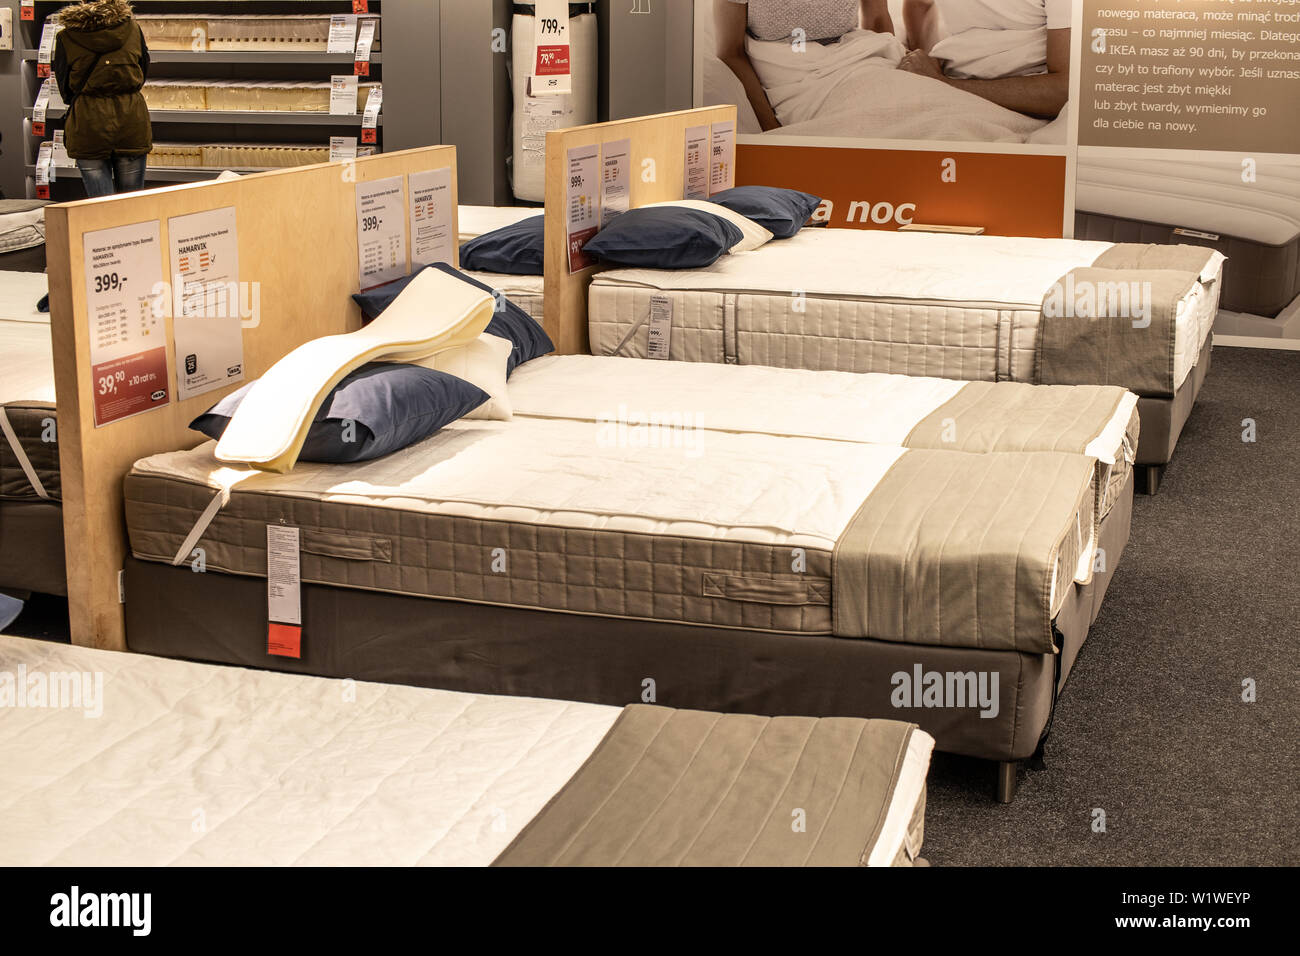 Lodz, Poland, Jan 2019 exhibition interior IKEA store. bed in modern bedroom. IKEA sells ready-to-assemble furniture, appliances, home accessories Stock Photo